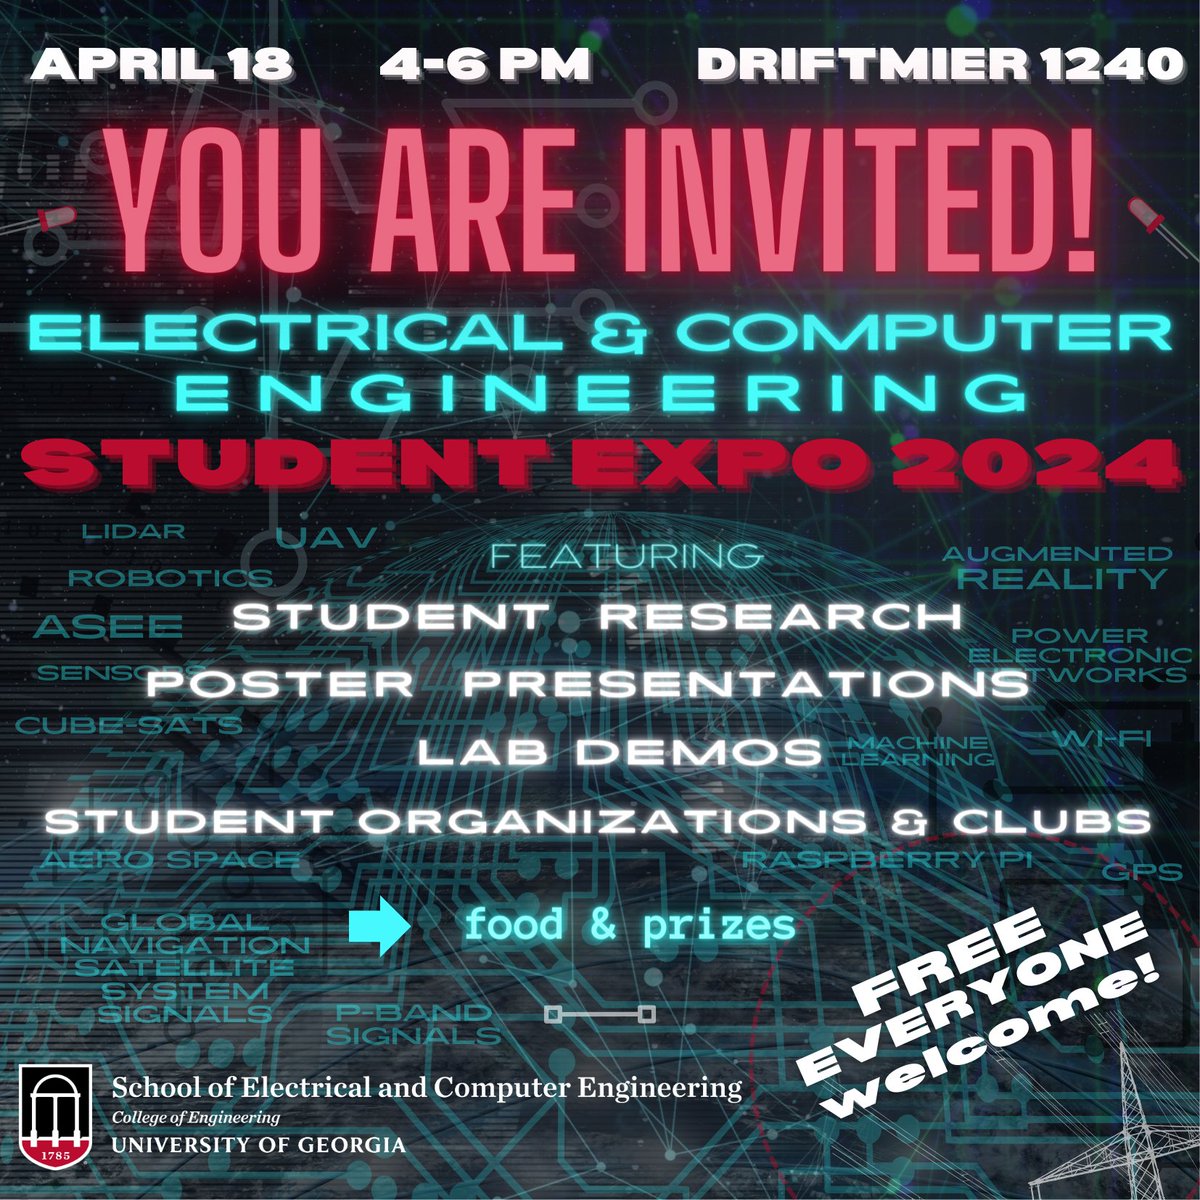 The School of Electrical and Computer Engineering is hosting our second Student Research and Activities Expo tomorrow, April 18, from 4-6 pm in 1240 Driftmier Engineering. Everyone is invited to attend!